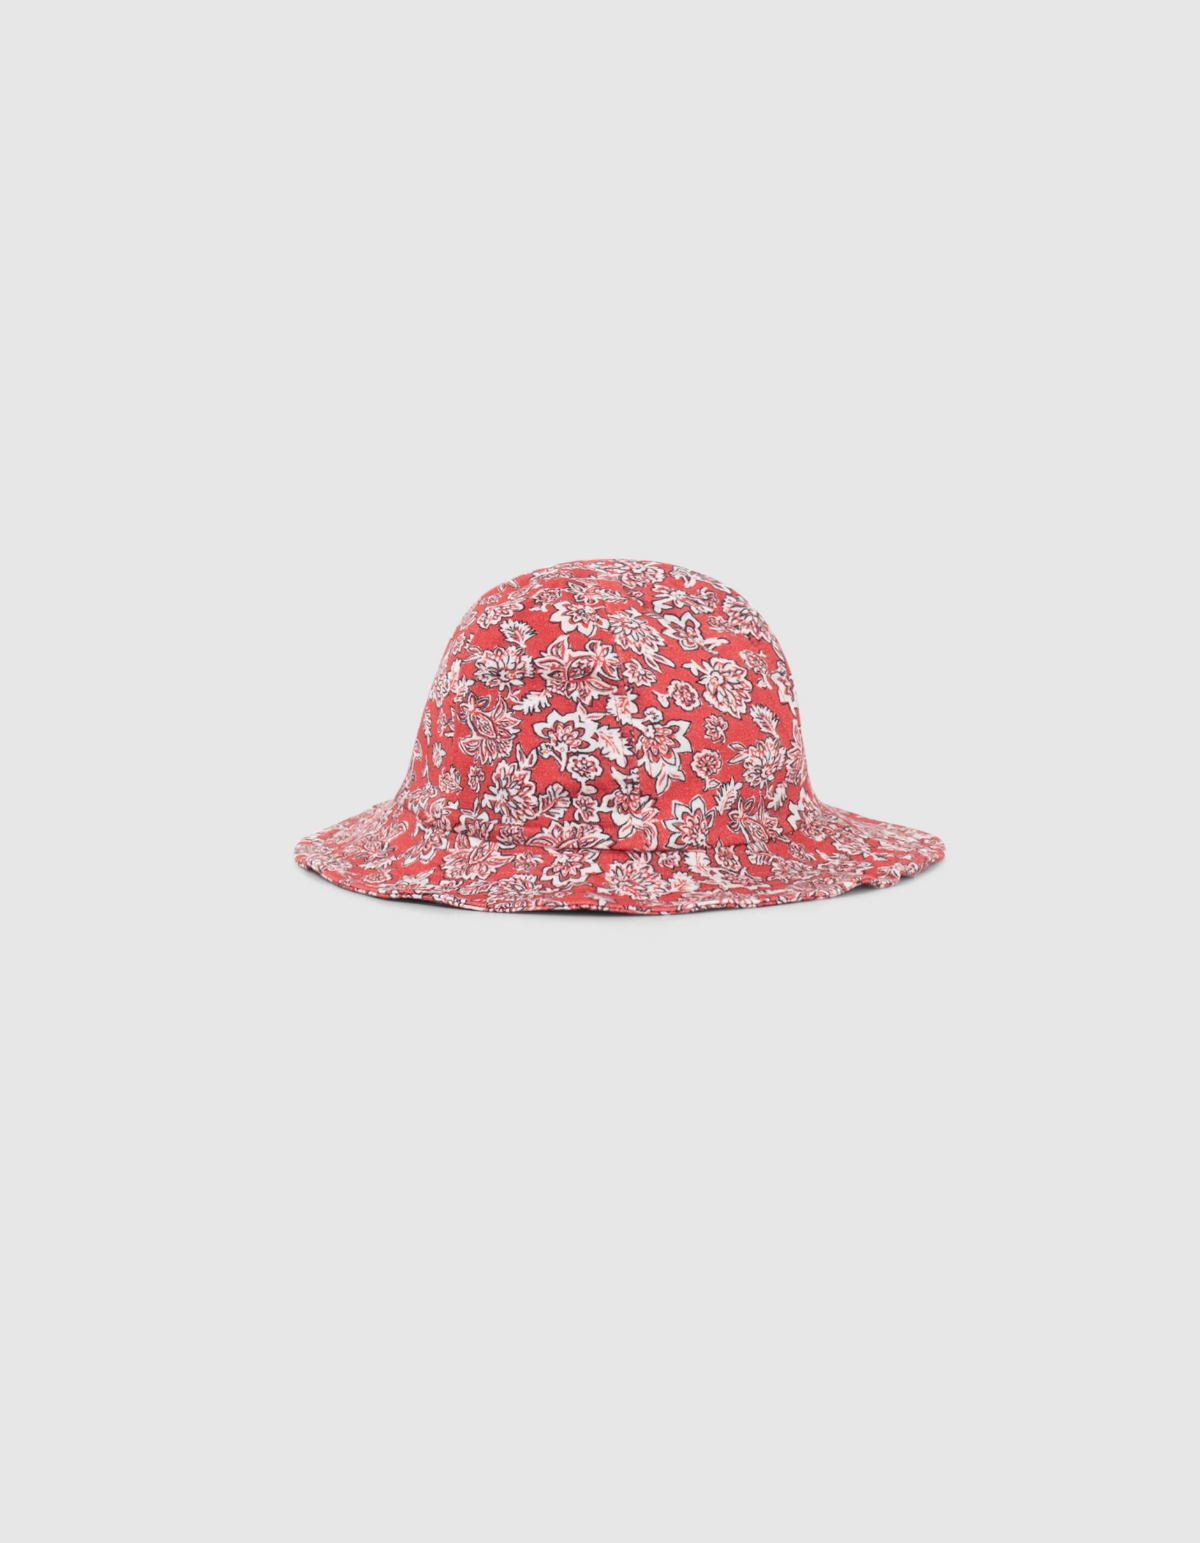 Baby girls’ red floral print hat